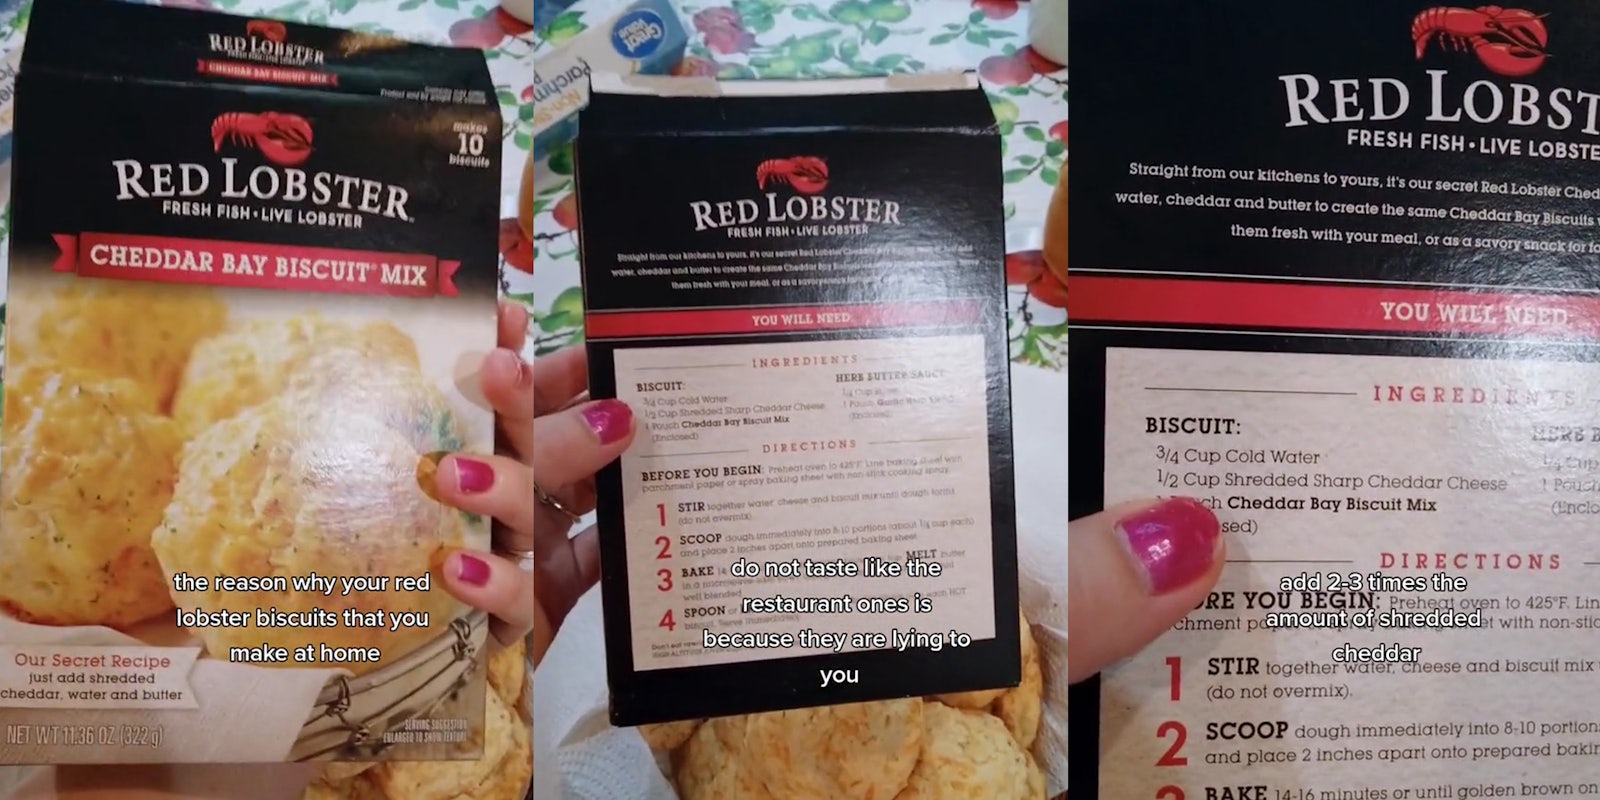 Red Lobster Cheddar Bay Biscuit Mix packaging with caption 'the reason why your red lobster biscuits that you make at home' (l) Red Lobster Cheddar Bay Biscuit Mix packaging with caption 'do not taste like the restaurant ones is because they are lying to you' (c) Red Lobster Cheddar Bay Biscuit Mix packaging with caption 'ad 2-3 times the amount of shredded cheddar' (r)